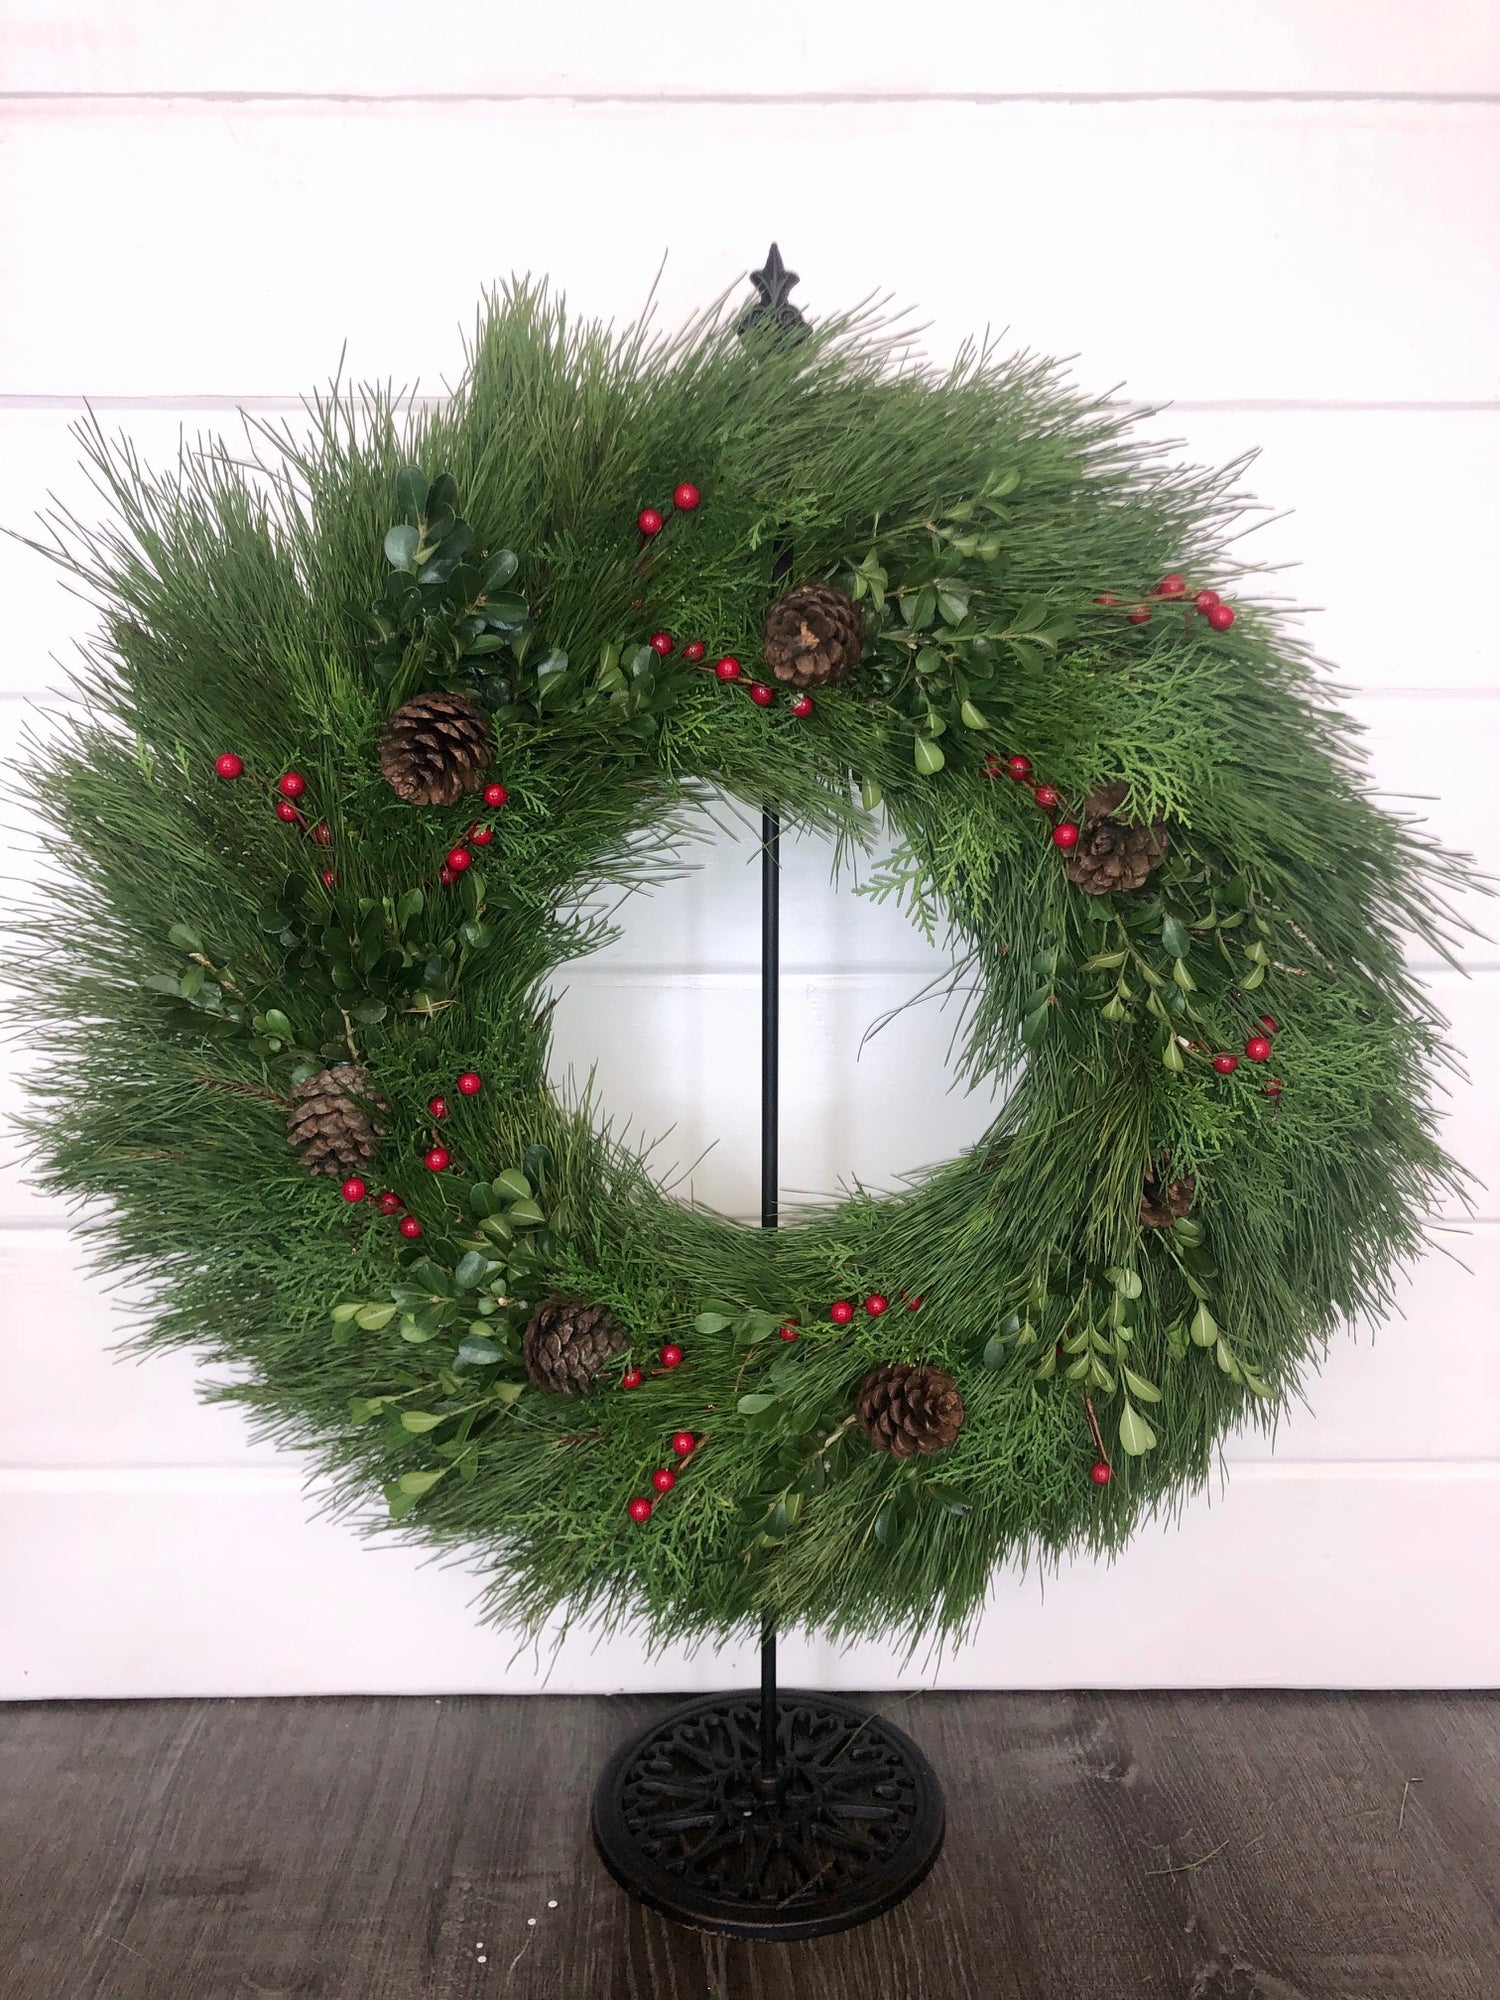 Leyland Cypress, Florida Pine, Boxwood, and Red Berries Wreath